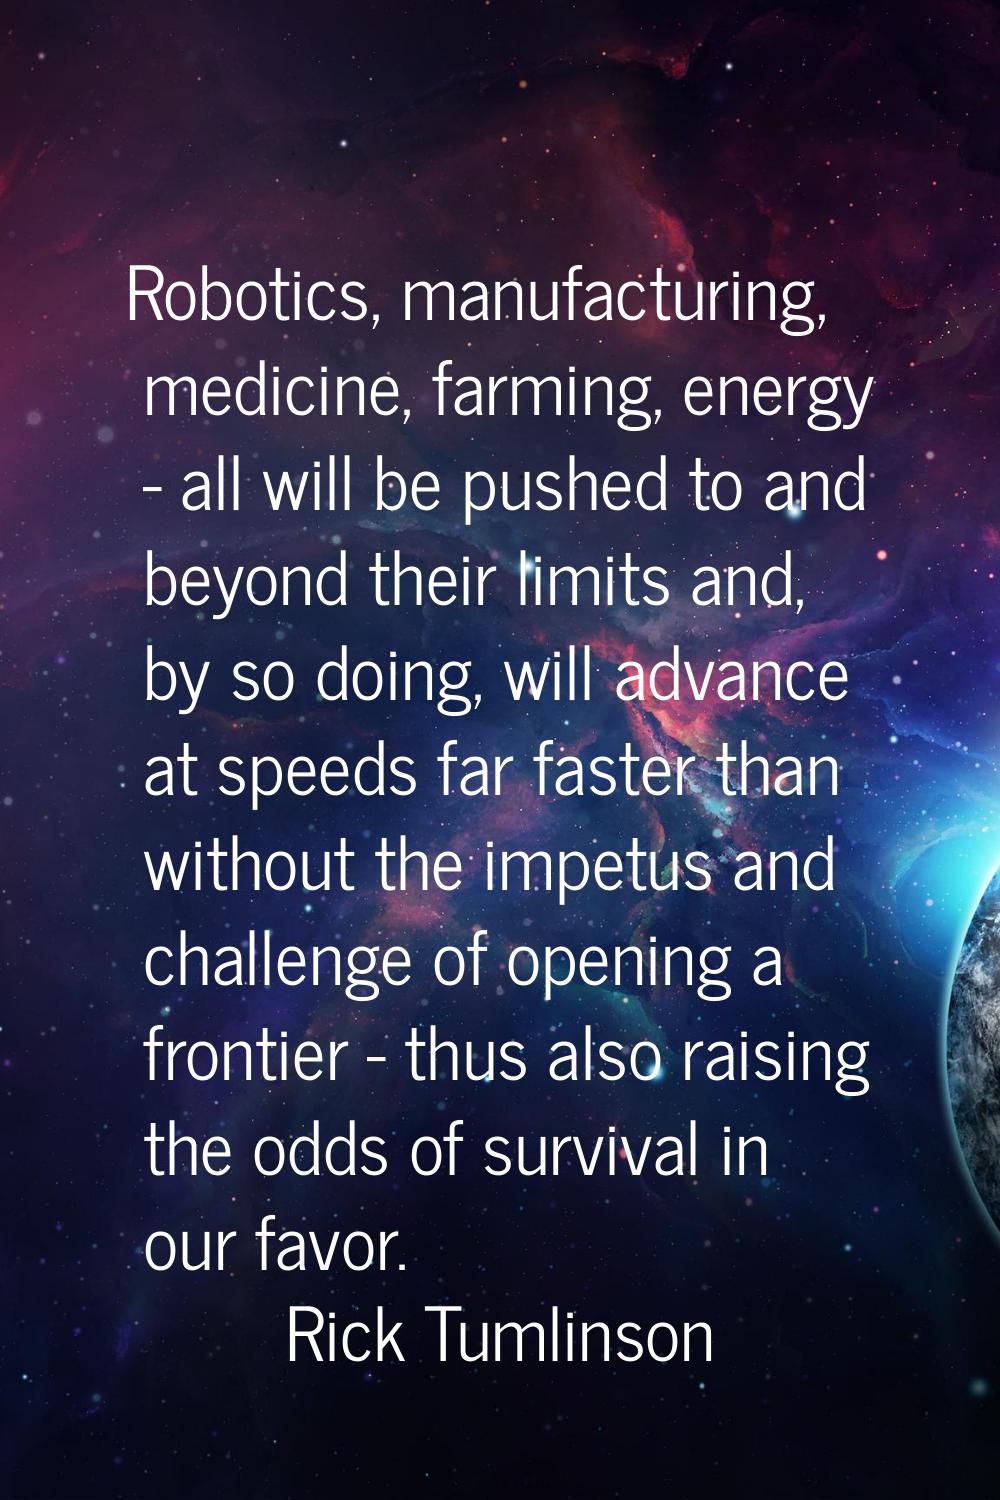 Robotics, manufacturing, medicine, farming, energy - all will be pushed to and beyond their limits 